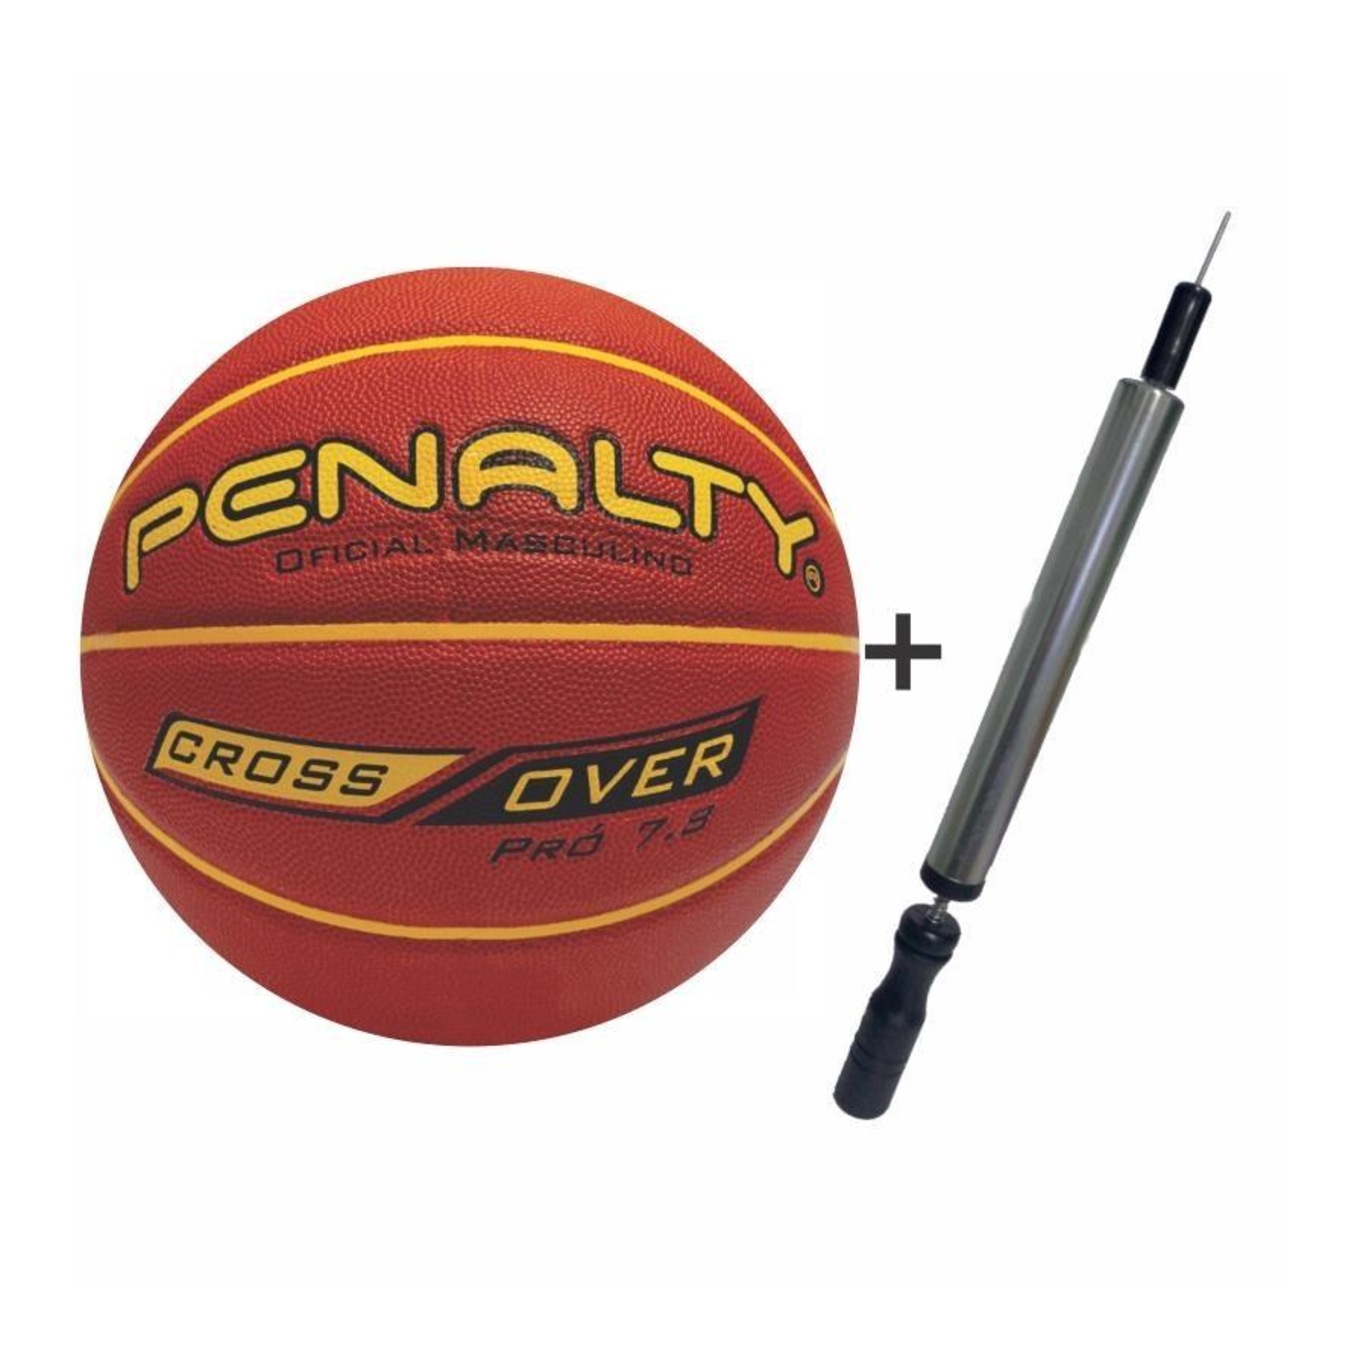 Bola Basquete Penalty Pro 7.8 Crossover Original Nbb C/ Nf